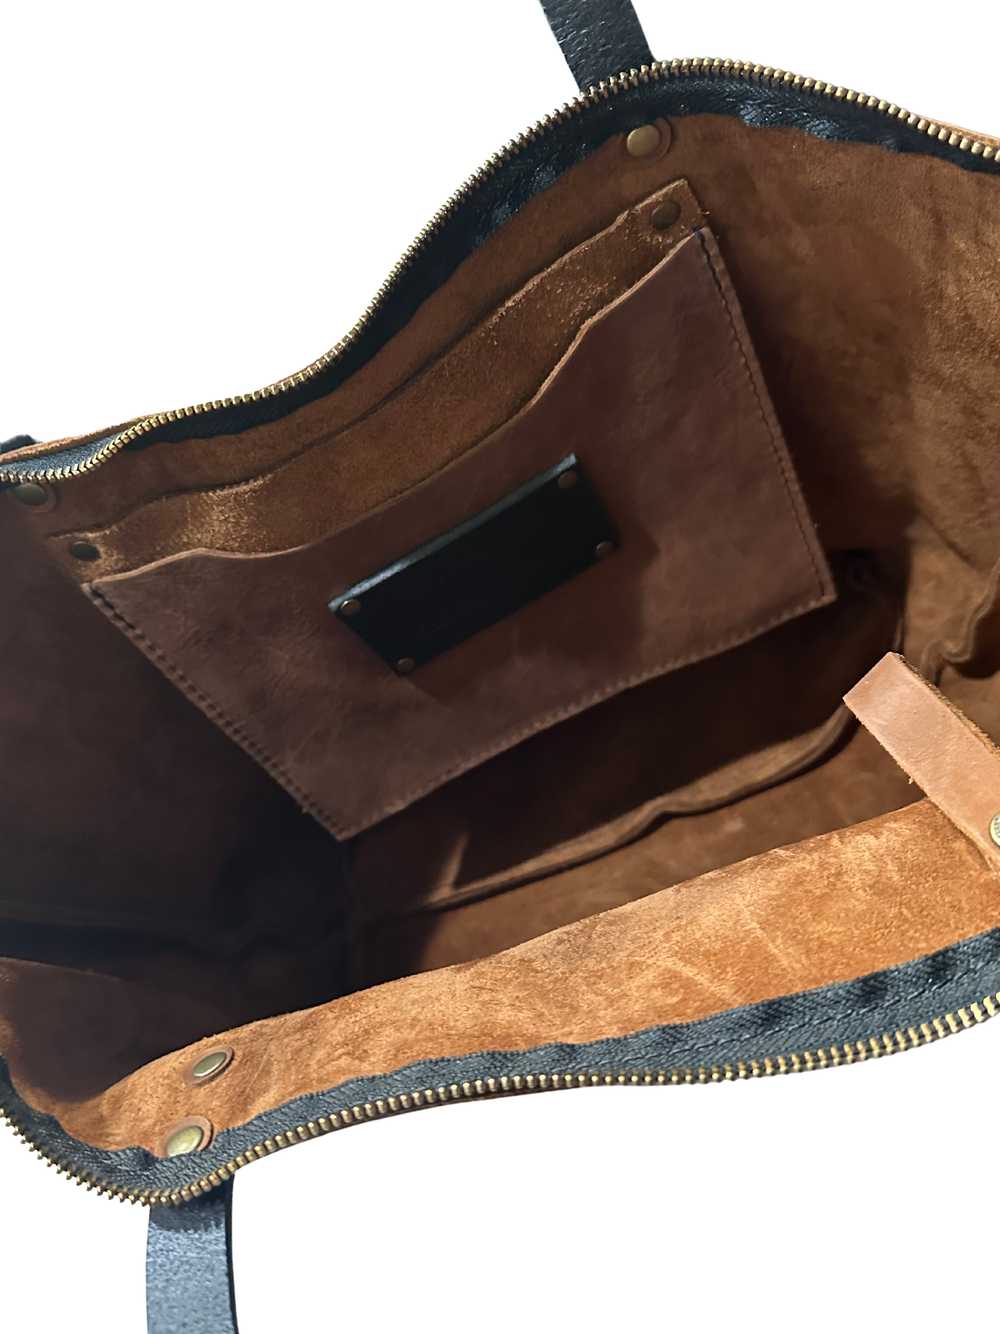 Portland Leather 'Almost Perfect' Leather Tote Bag - image 5